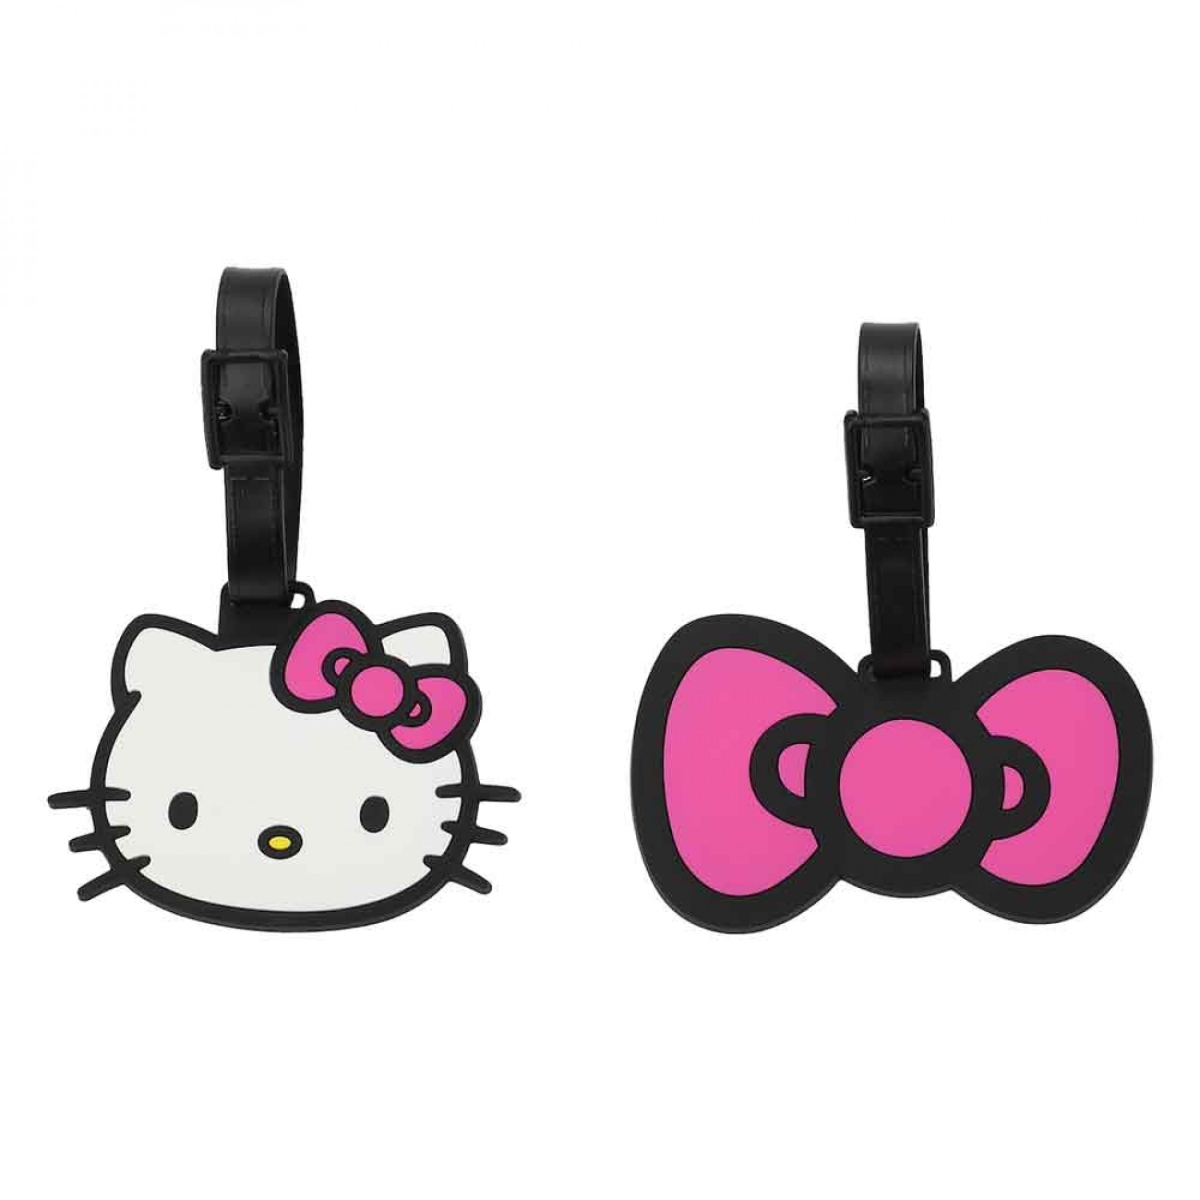 Hello Kitty 873090 Hello Kitty Luggage Tags - Pack of 2